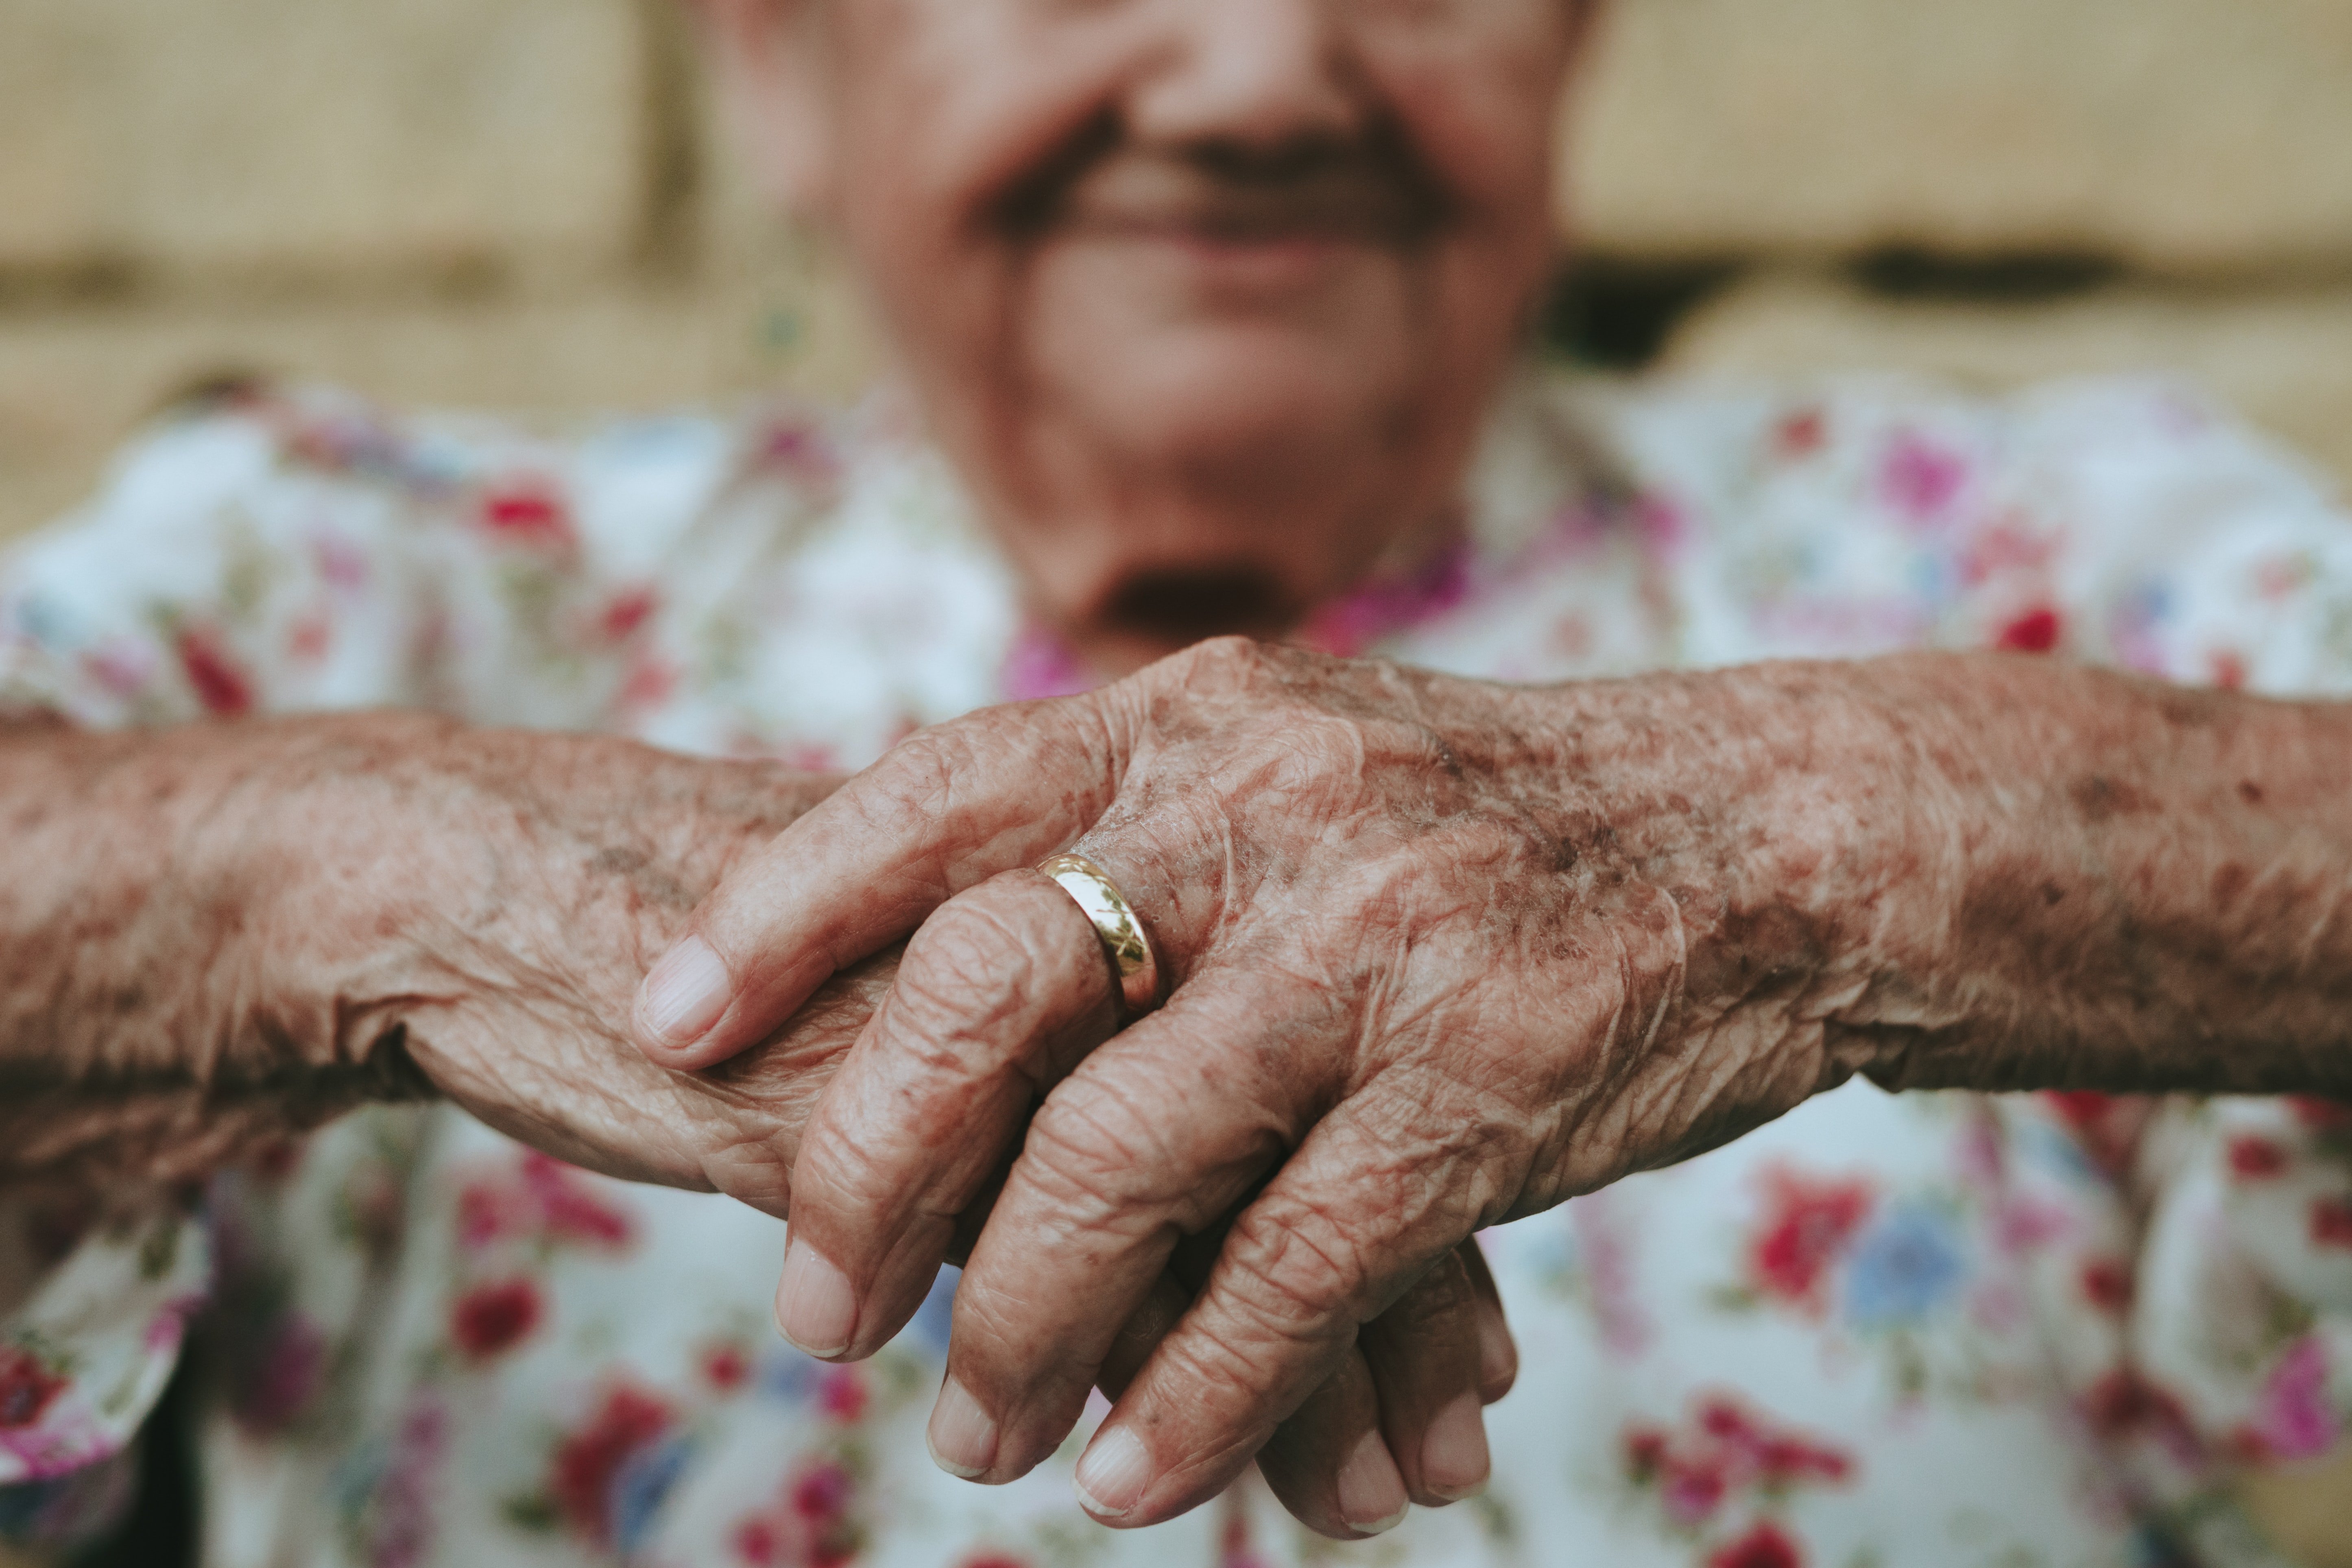 Thanks to Jerry, the old lady was rescued. | Source: Unsplash